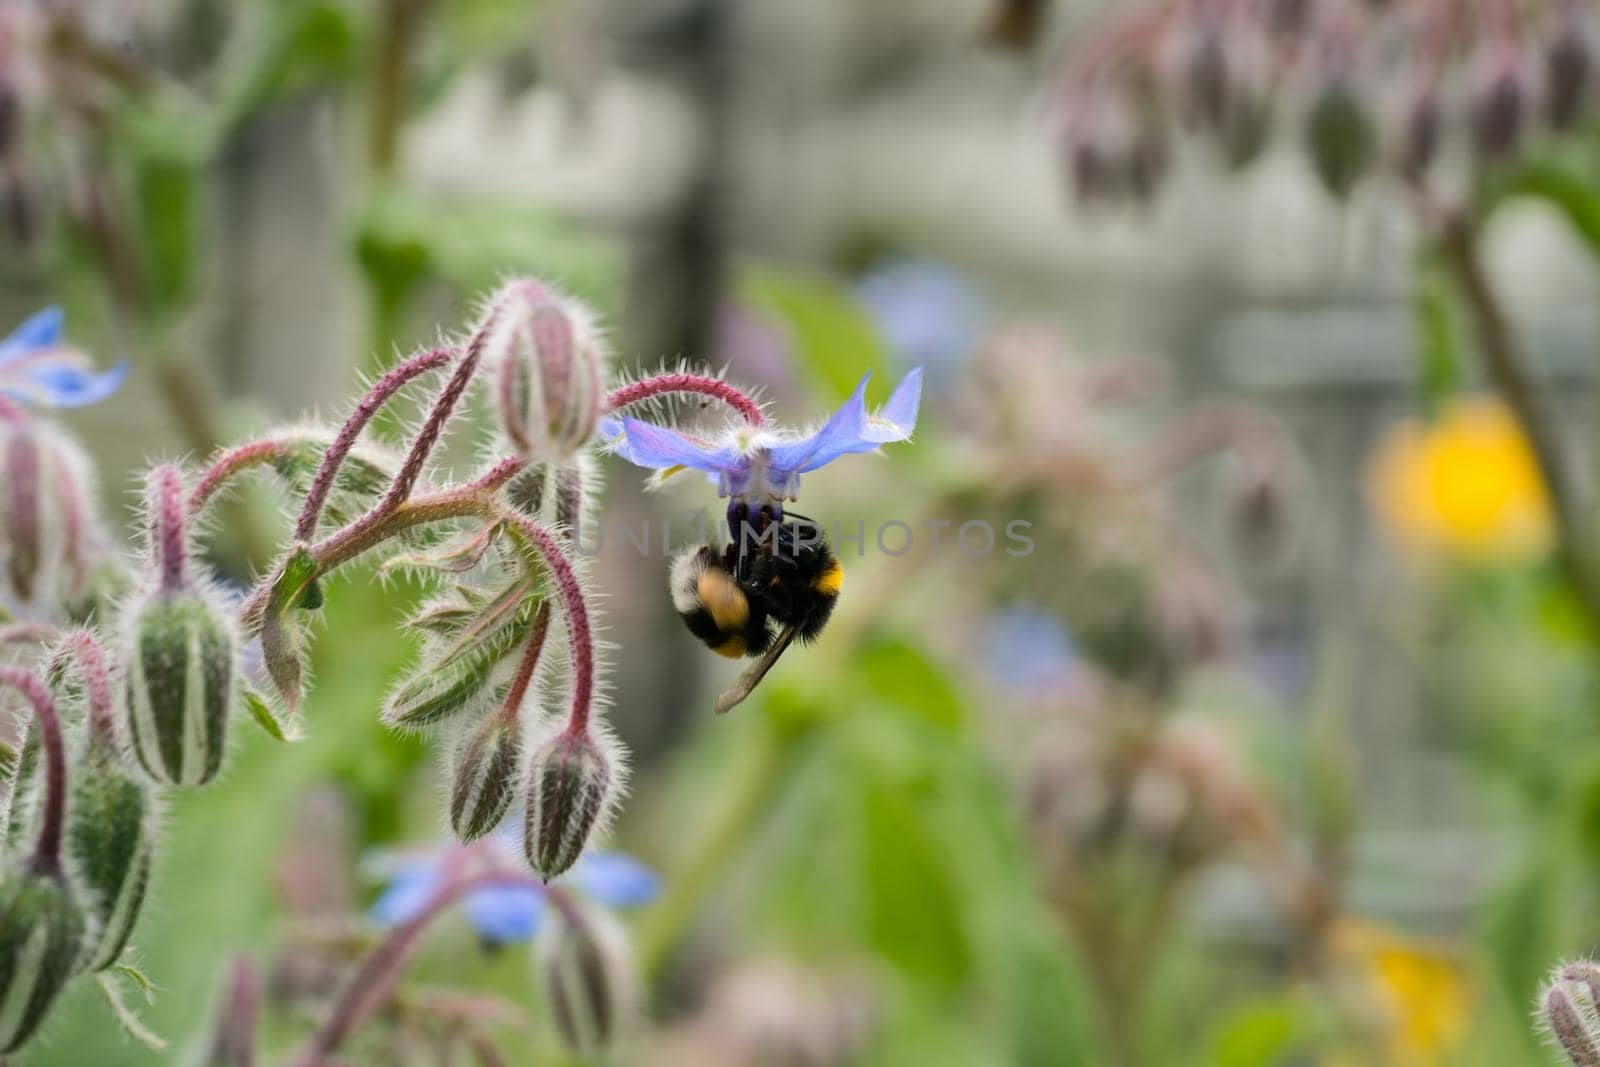 Bumblebee on borago officinalis flower, also known as a starflower, is an annual herb in the flowering plant family Boraginaceae by LeoniekvanderVliet